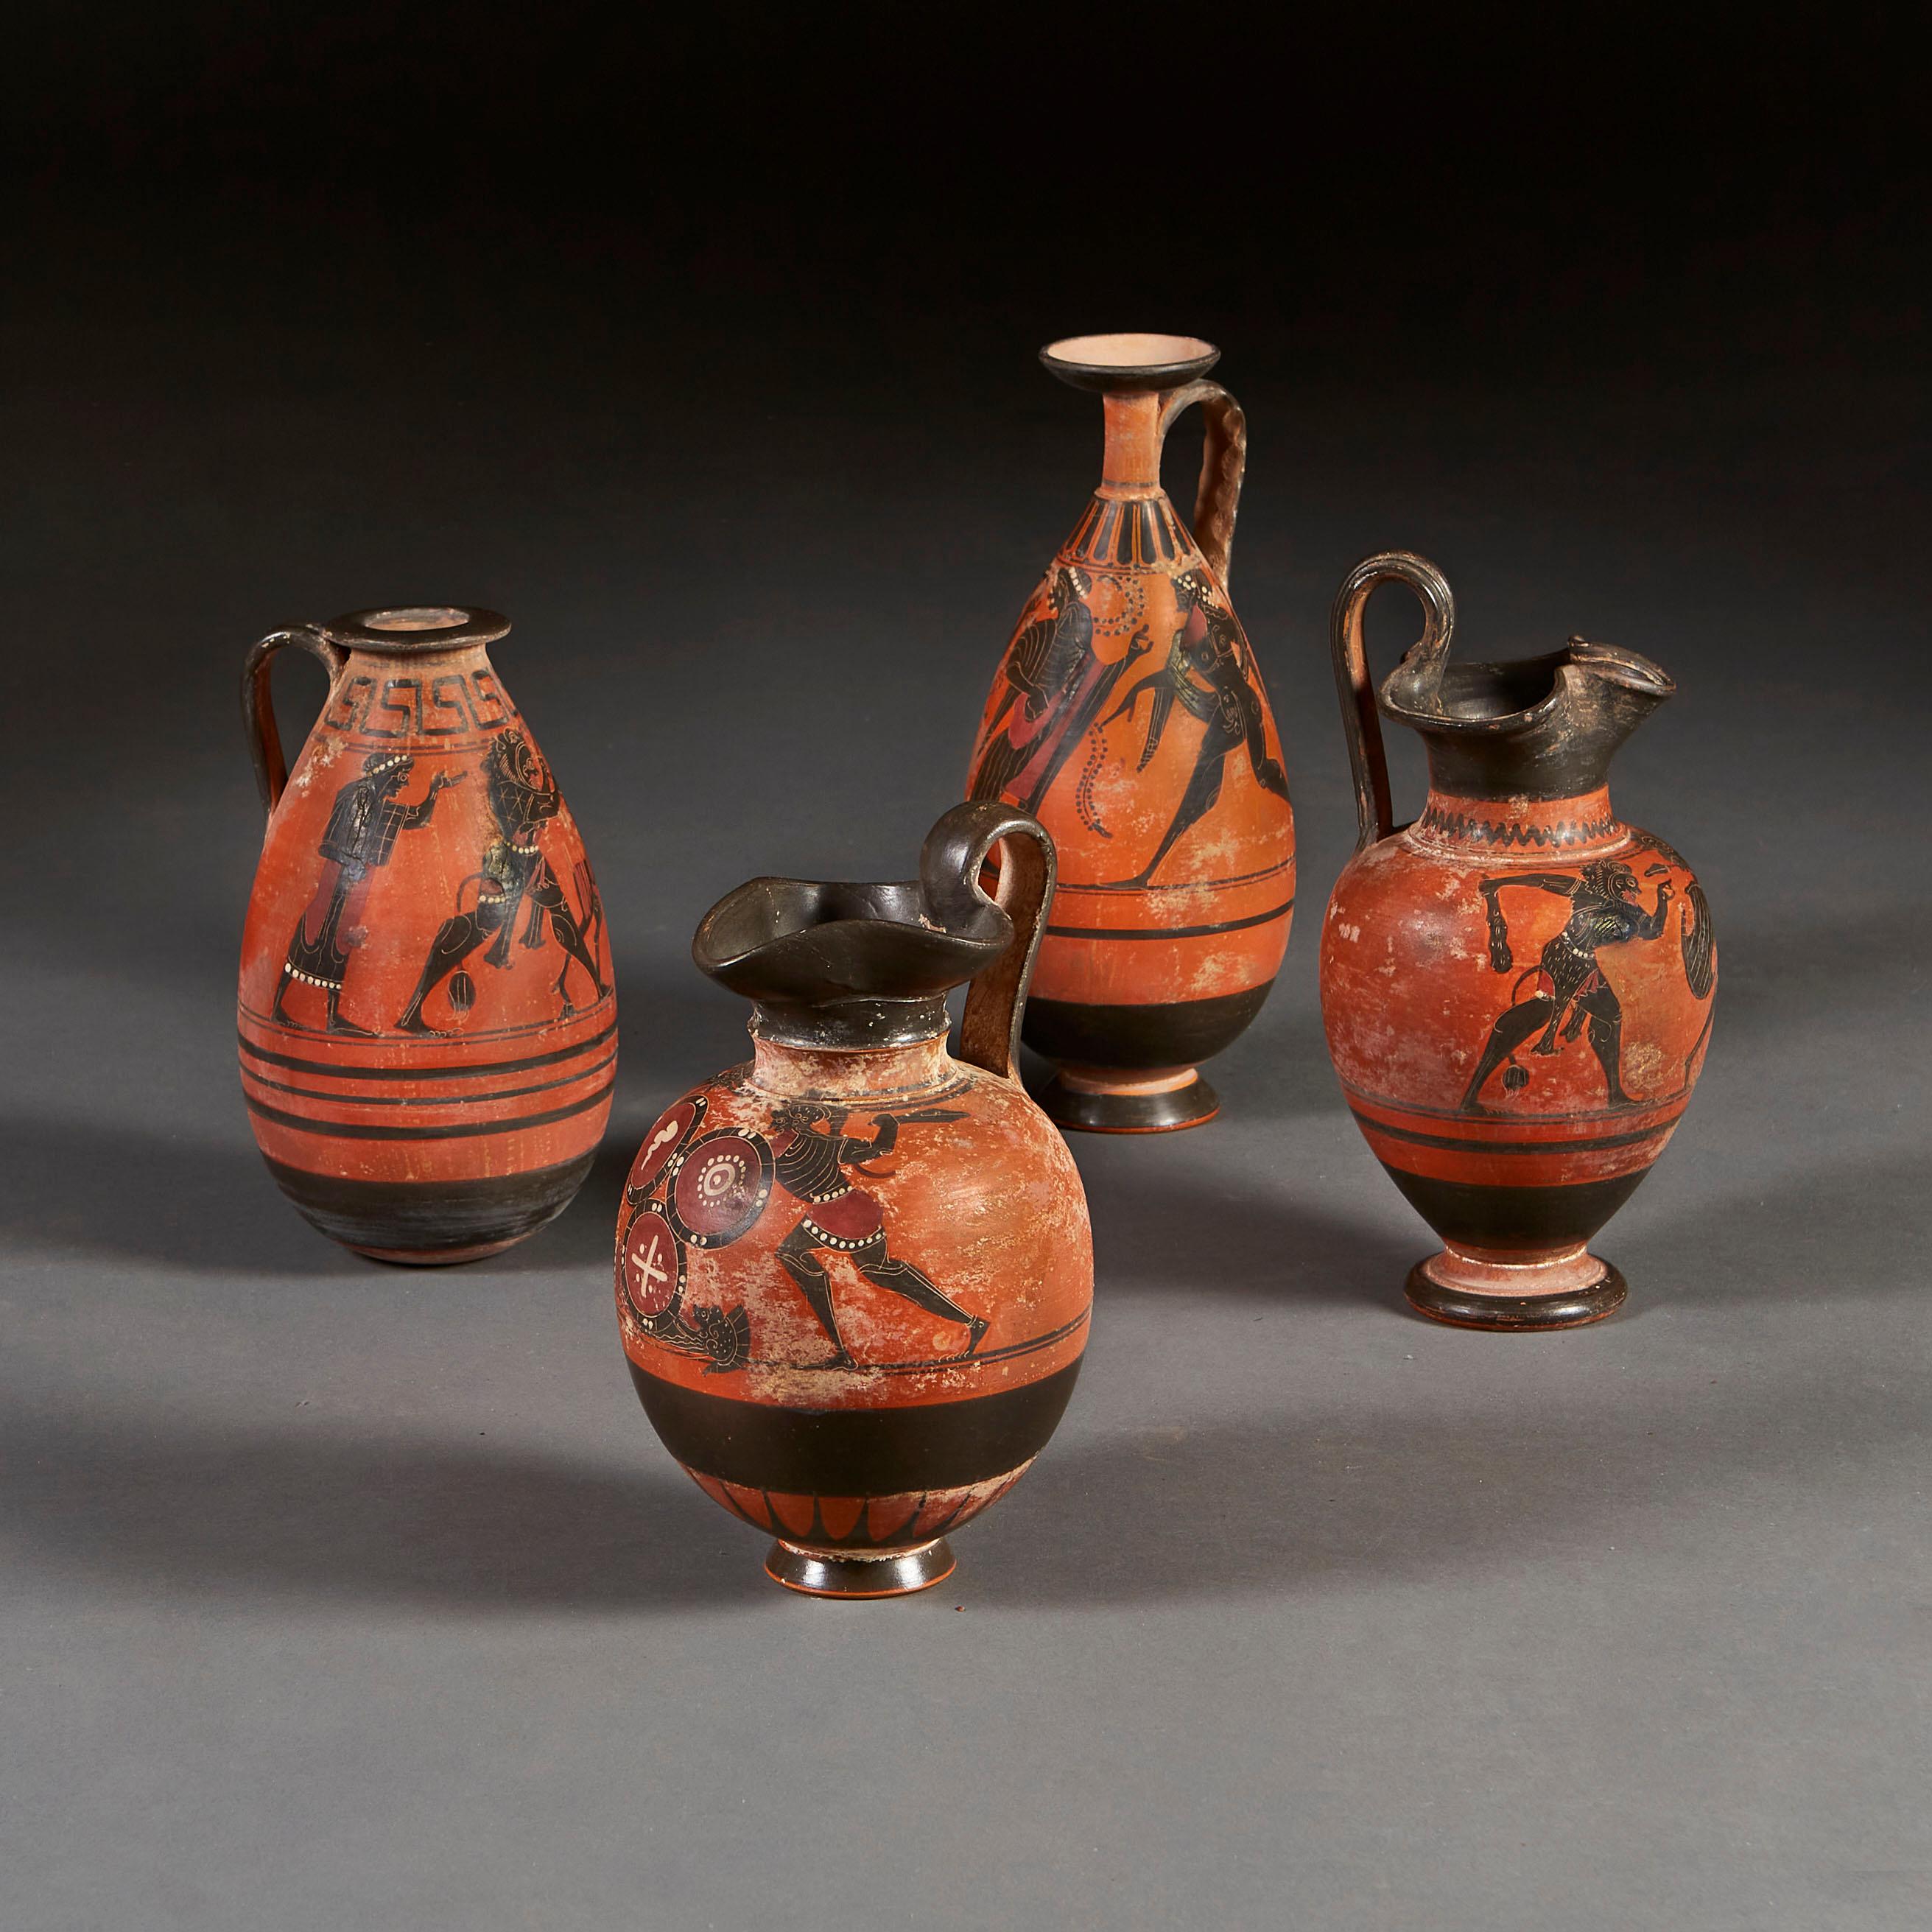 A group of nineteenth century vessels, replicating the Grand Tour objects of the previous century, with loop handles and of varying heights and forms, decorated with Greek figures and motives, on a terracotta ground.